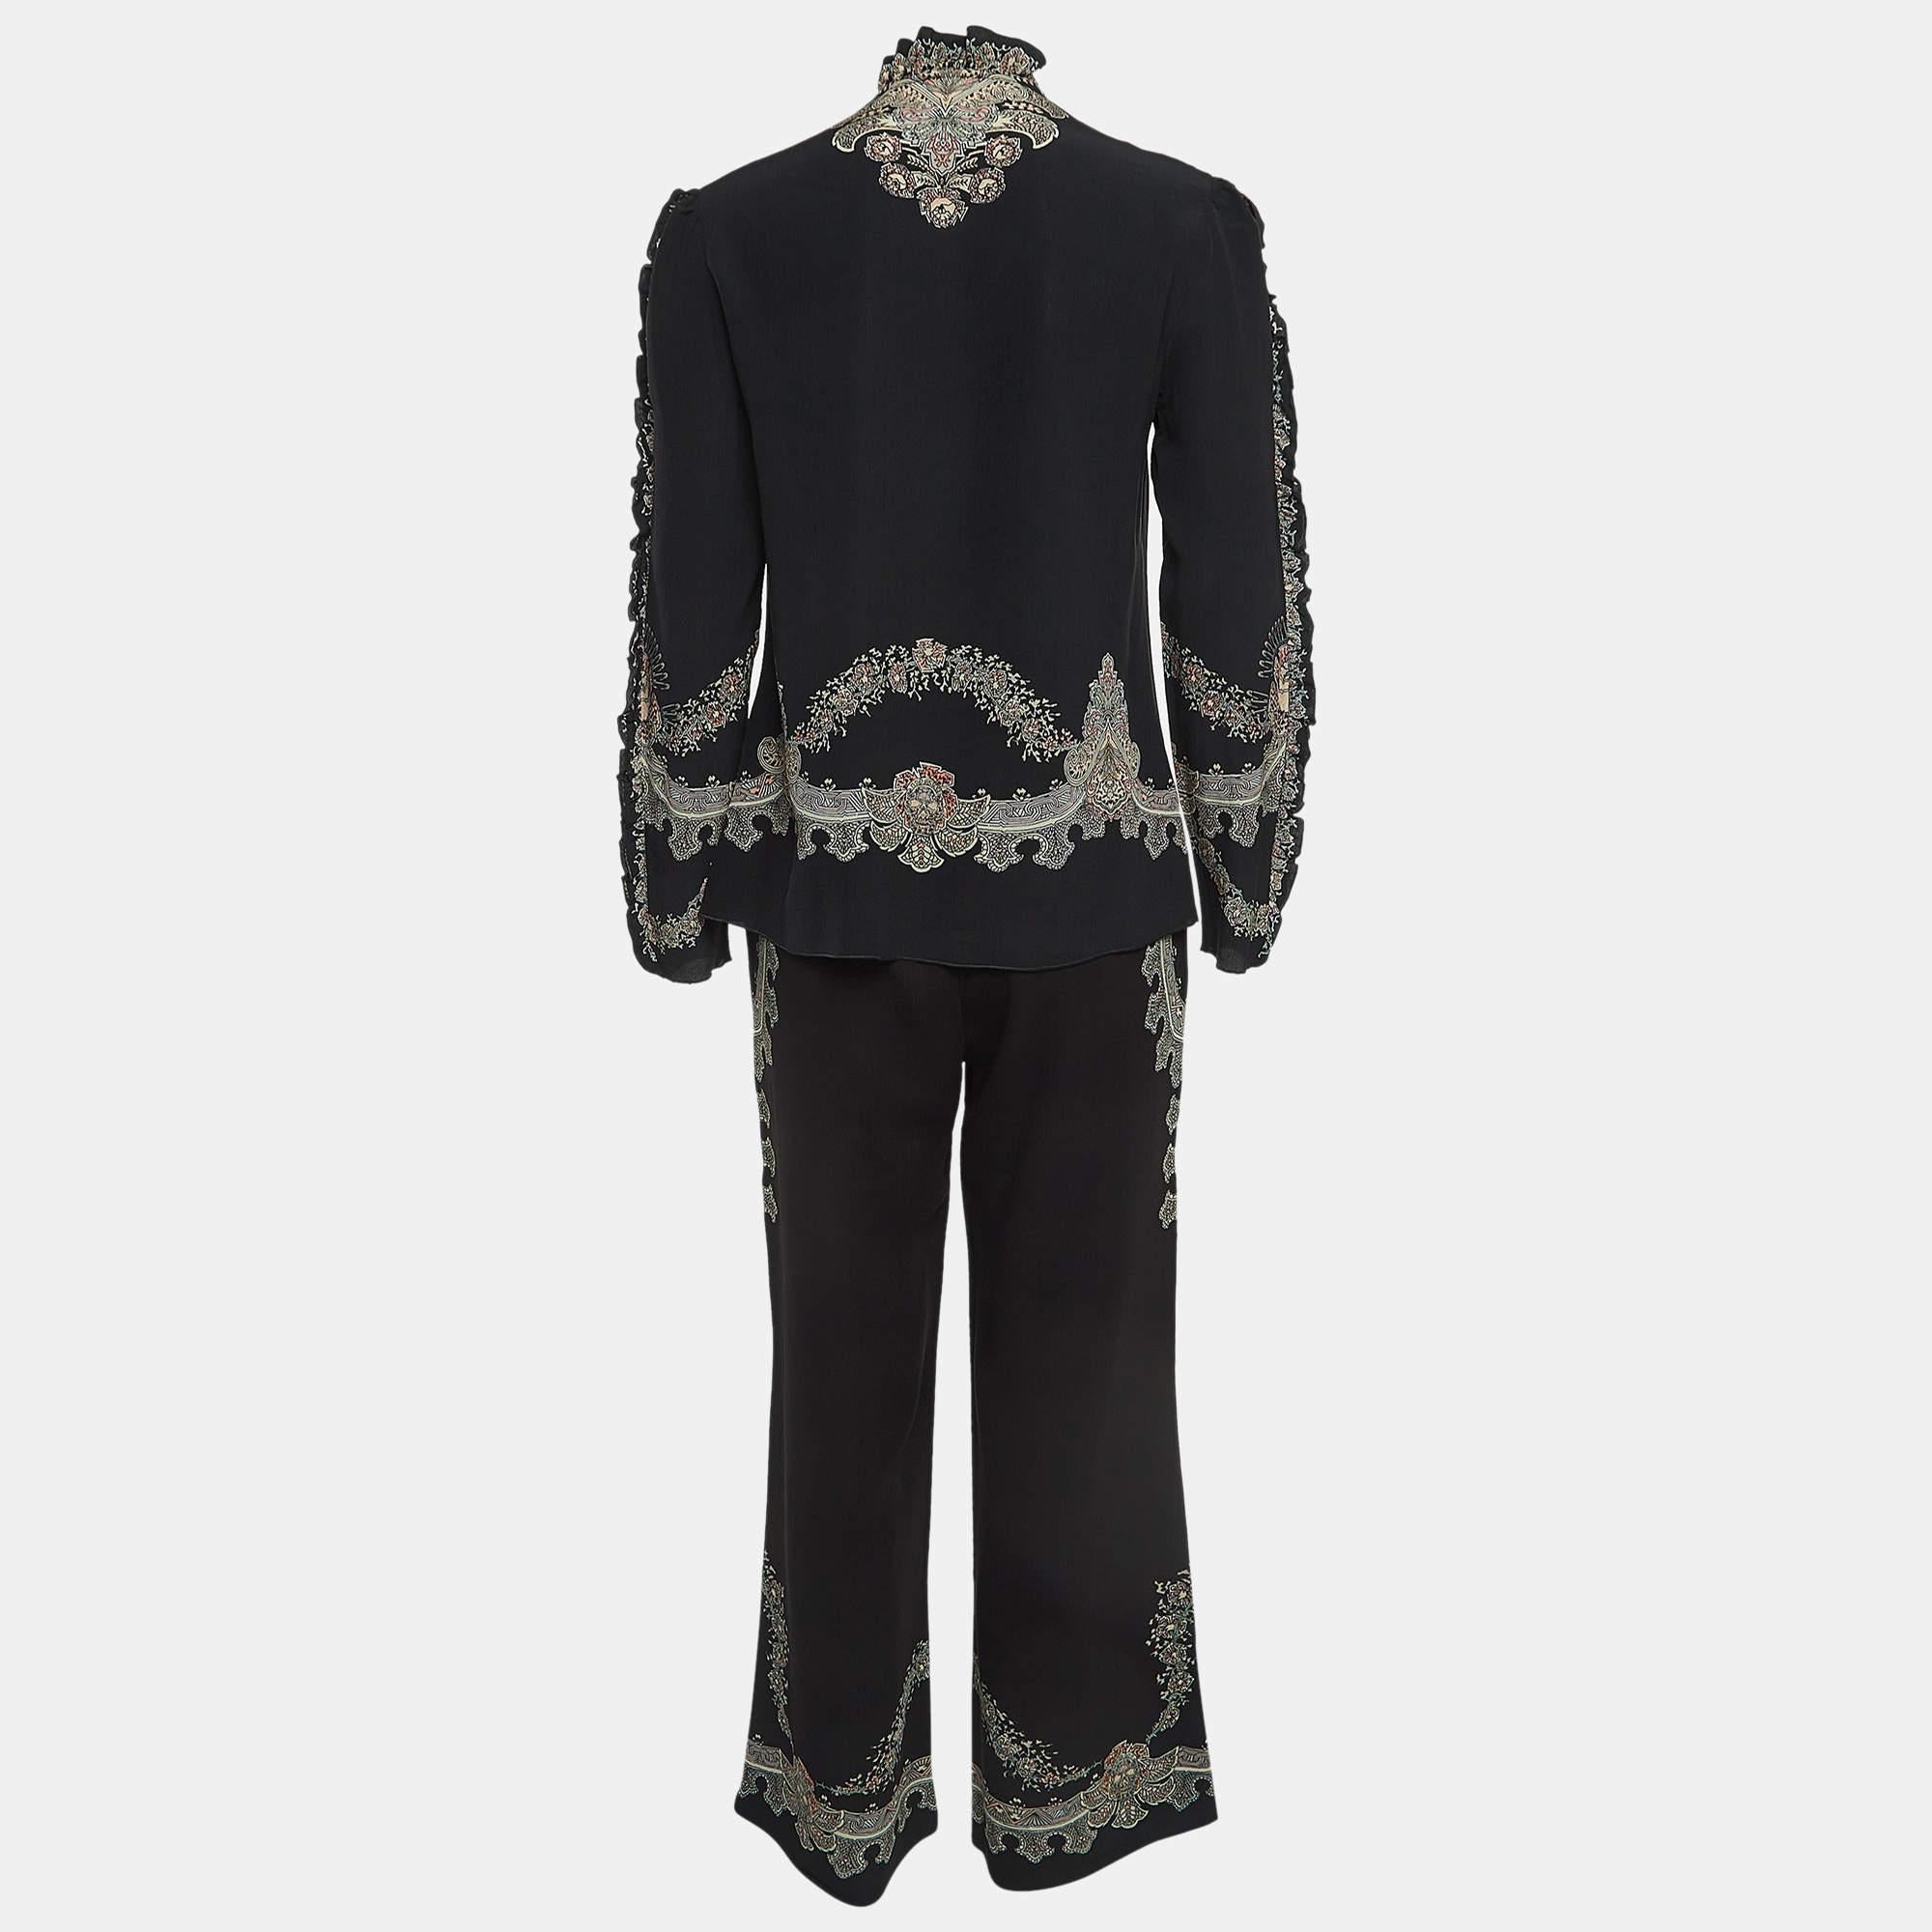 Invest in creating a well-curated wardrobe with 'wearable' pieces like this Etro shirt & trouser set. Tailored beautifully using silk, the set has intricate prints and a comfortable fit.

